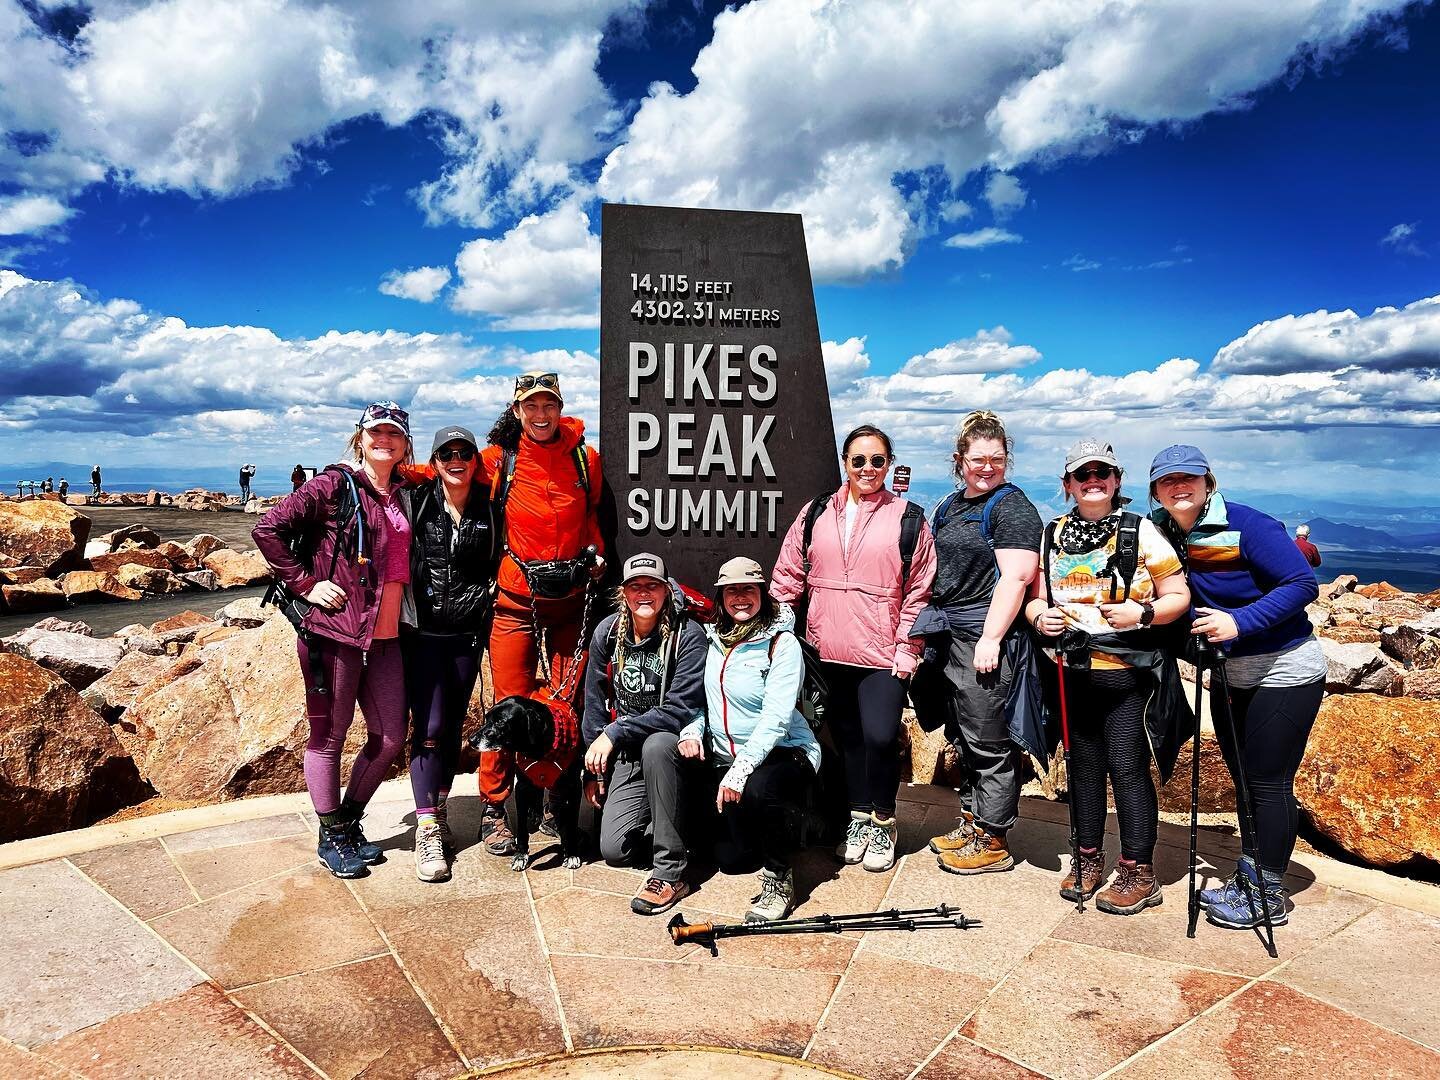 Pike&rsquo;s Peak. She stands at 14,115 ft. You each walked every step. All 4,403 ft of elevation gain. You committed to scaling this mountain and to navigating your own personal mountains as well.
. . . . . .
honoring commitments. navigating tricky 